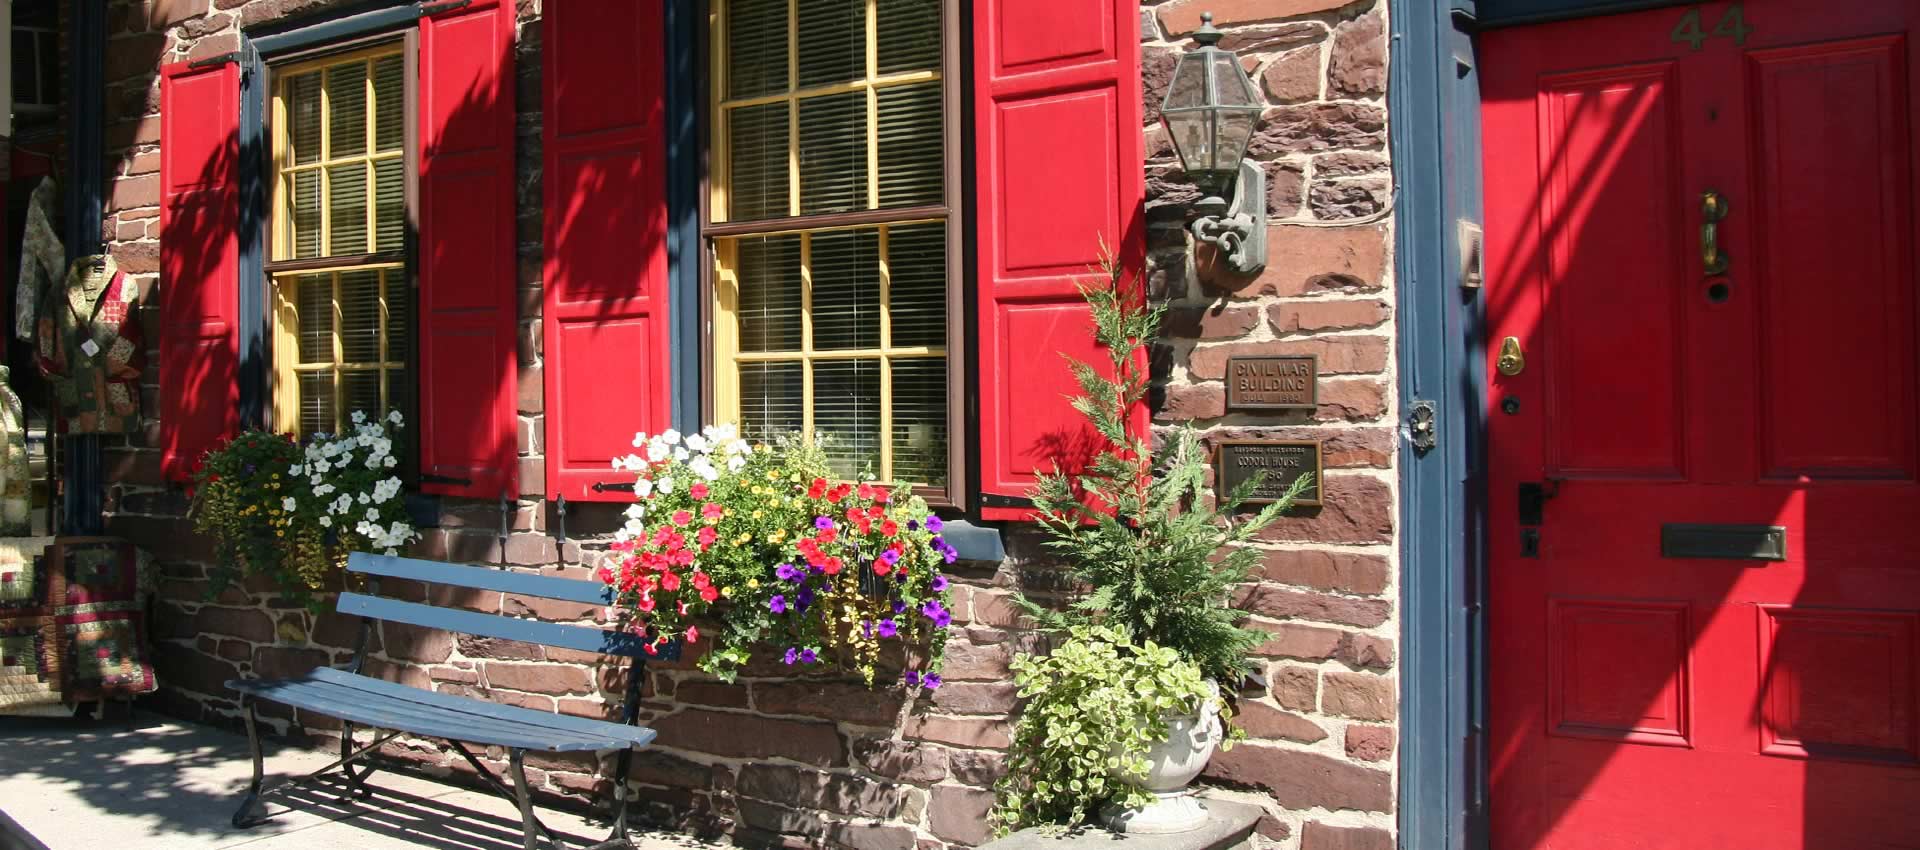 The front entry of the Brafferton Inn with flowers and bench